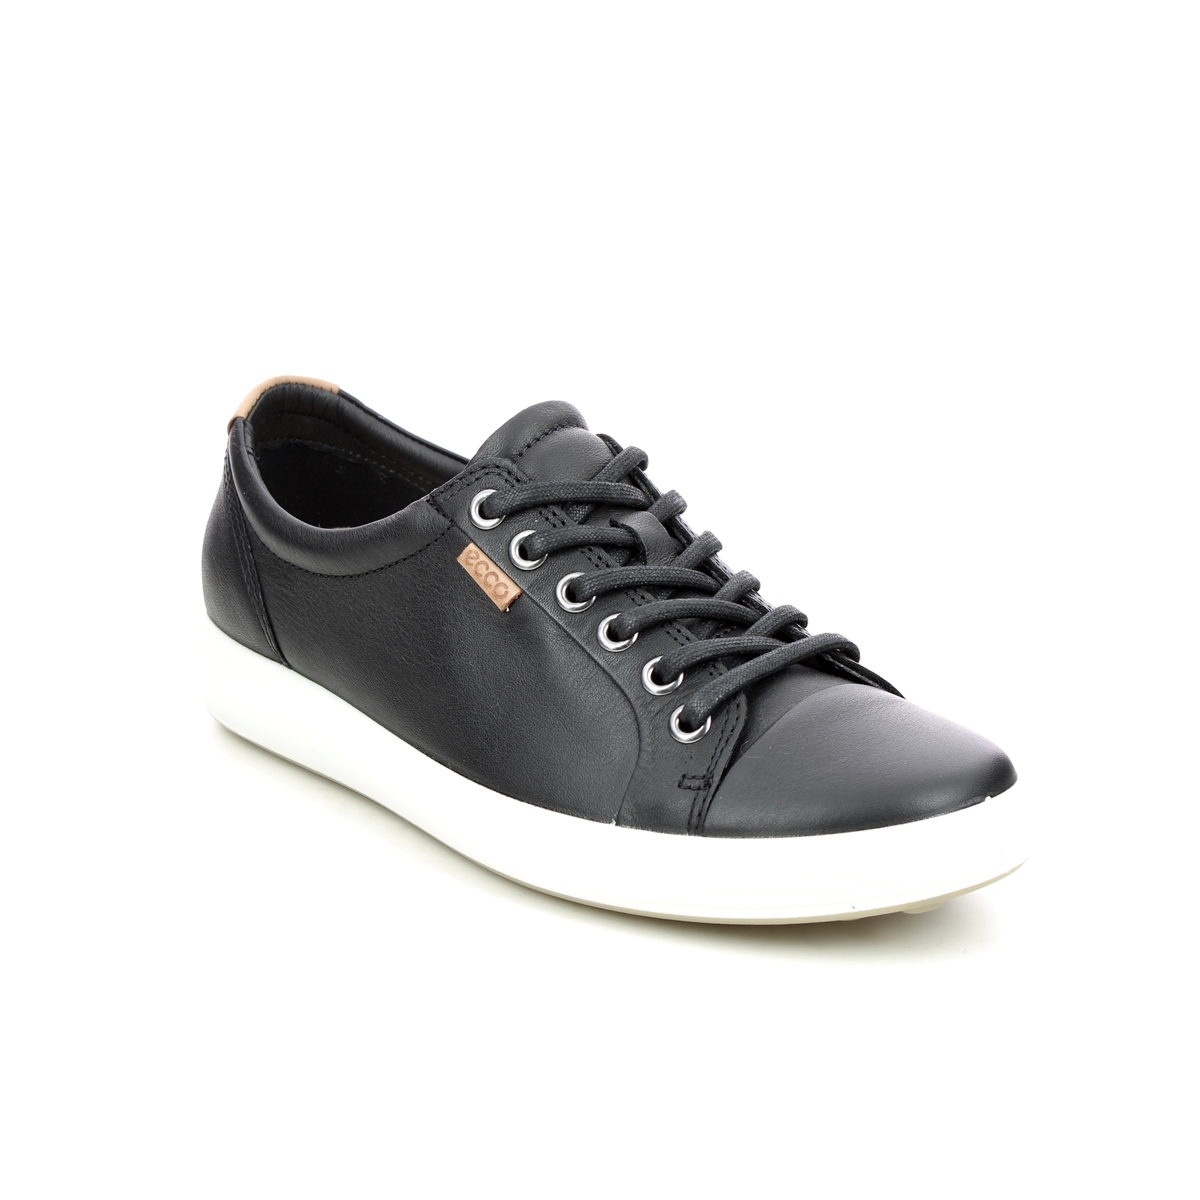 Ecco Soft 7 Lace Black Leather Womens Trainers 430003-01001 In Size 35 In Plain Black Leather